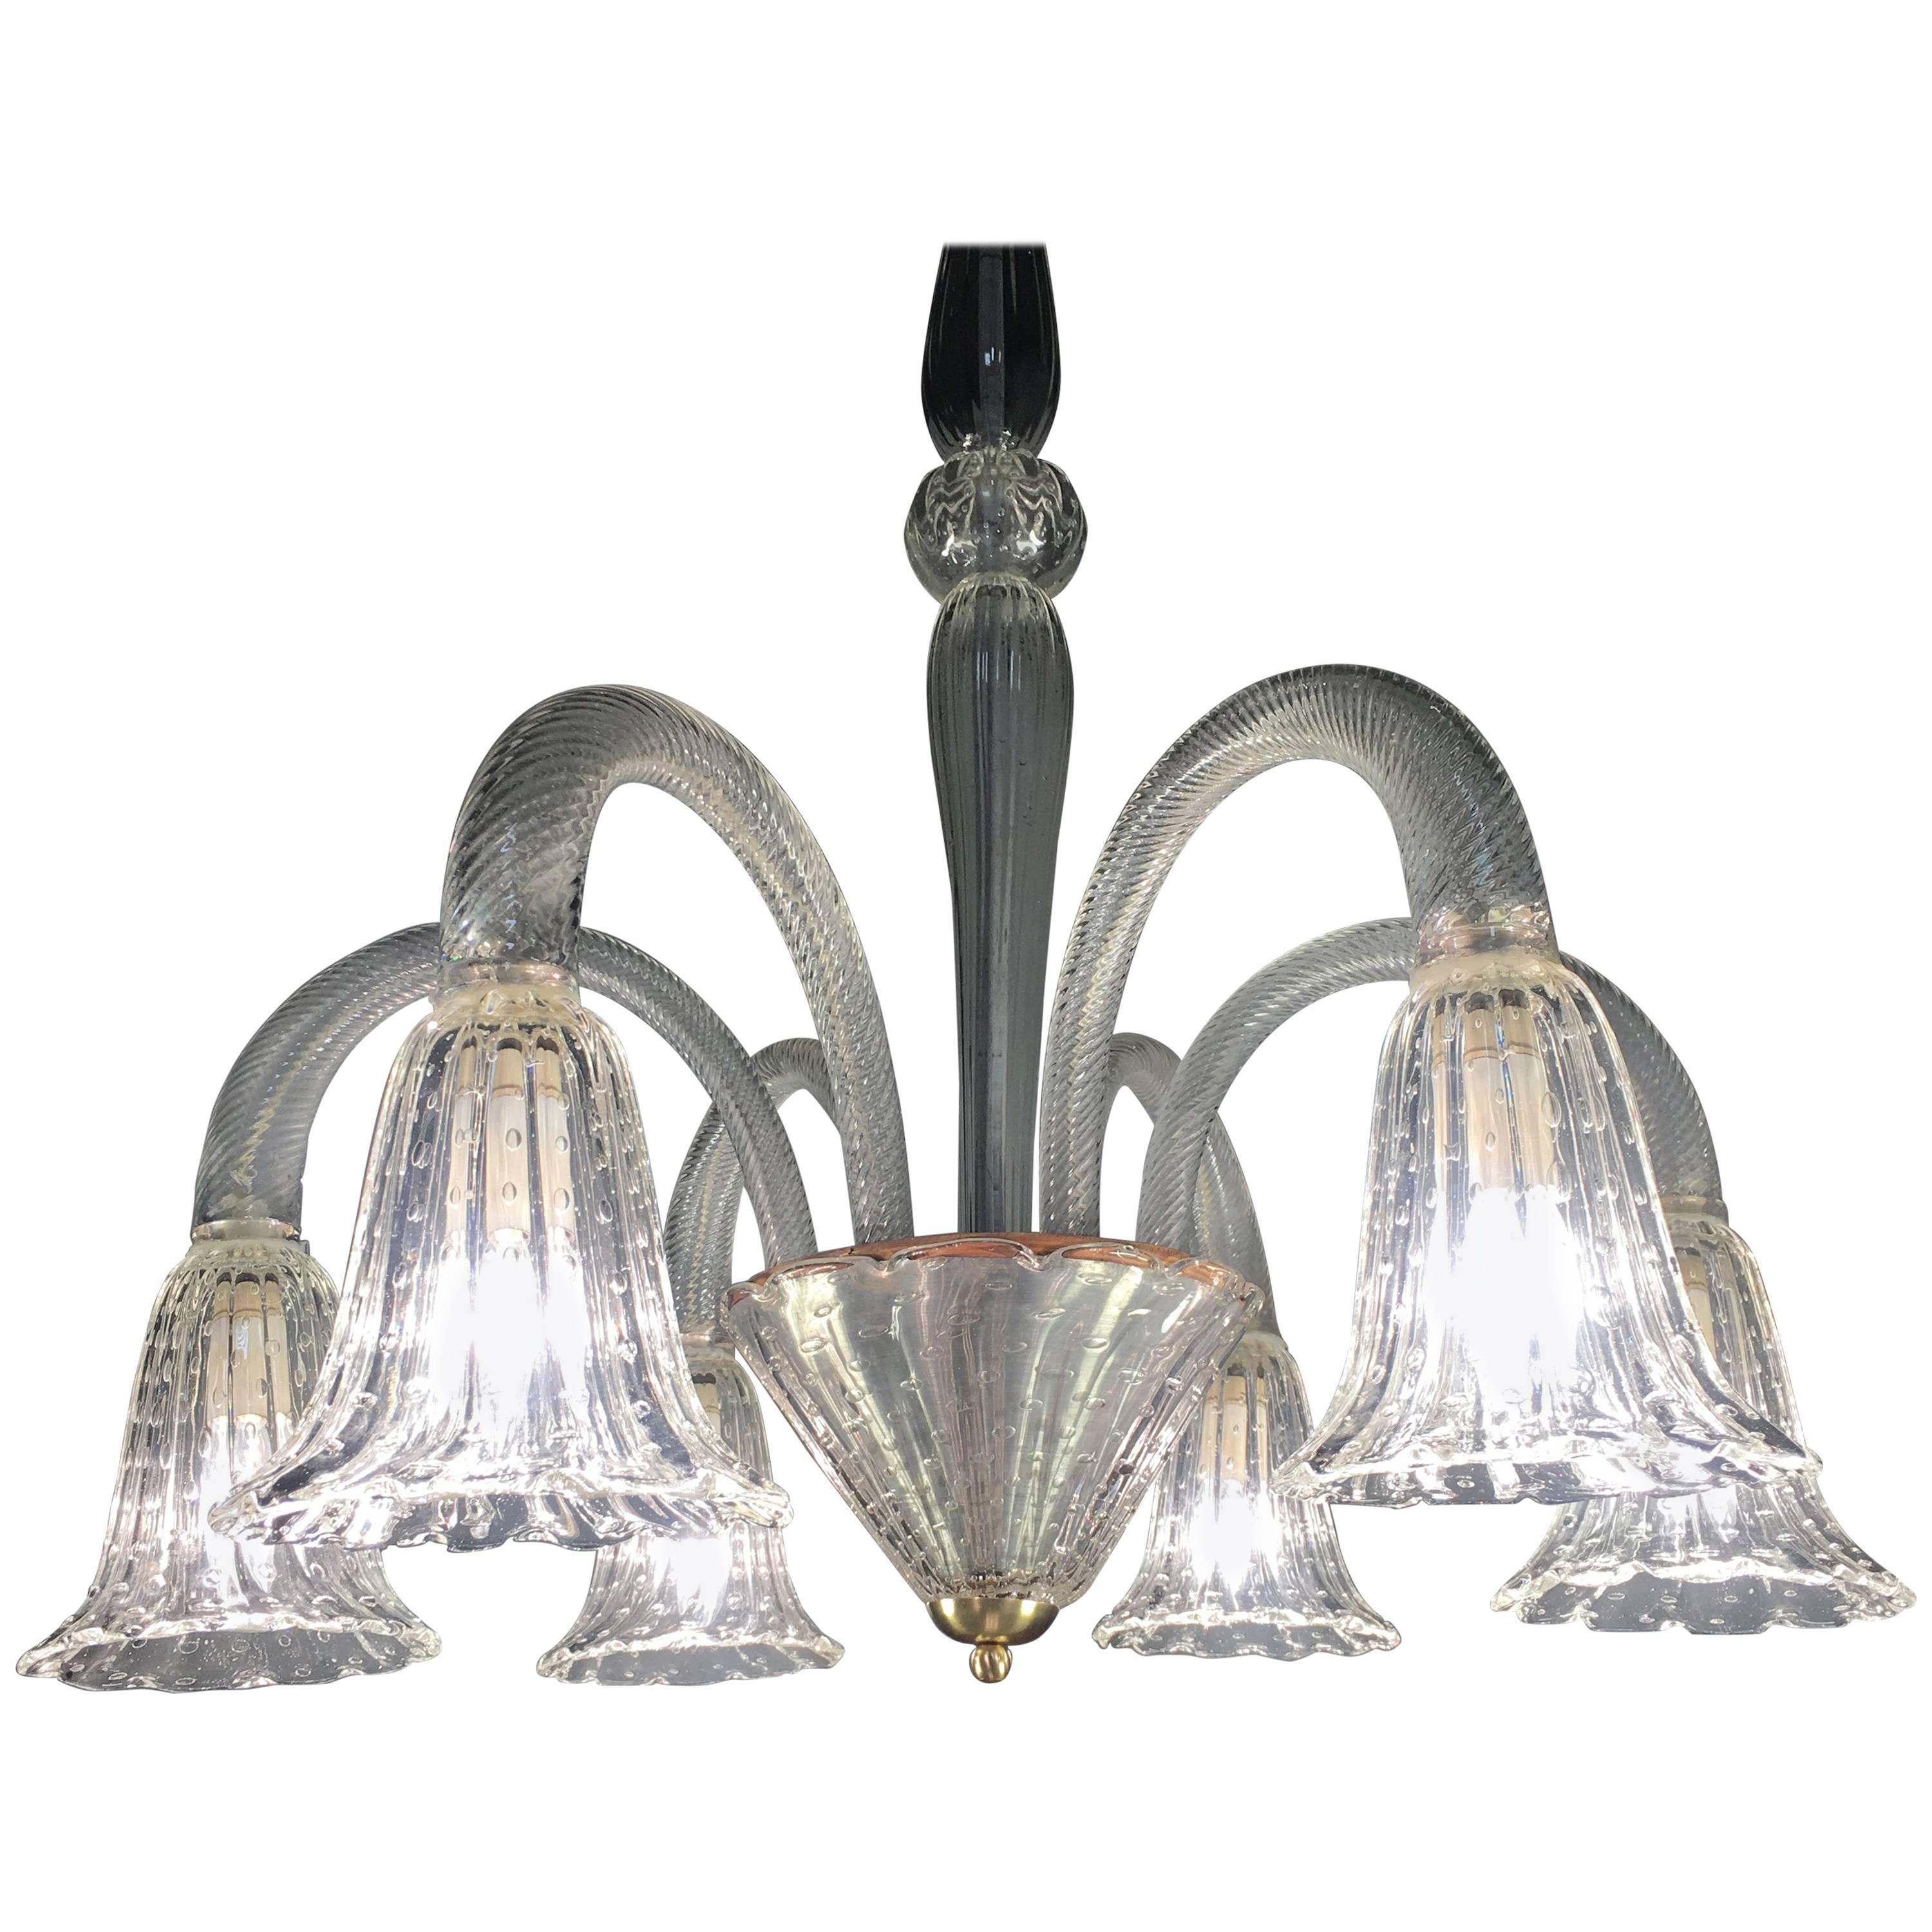 Art Deco Chandelier by Ercole Barovier, Murano, 1940s For Sale